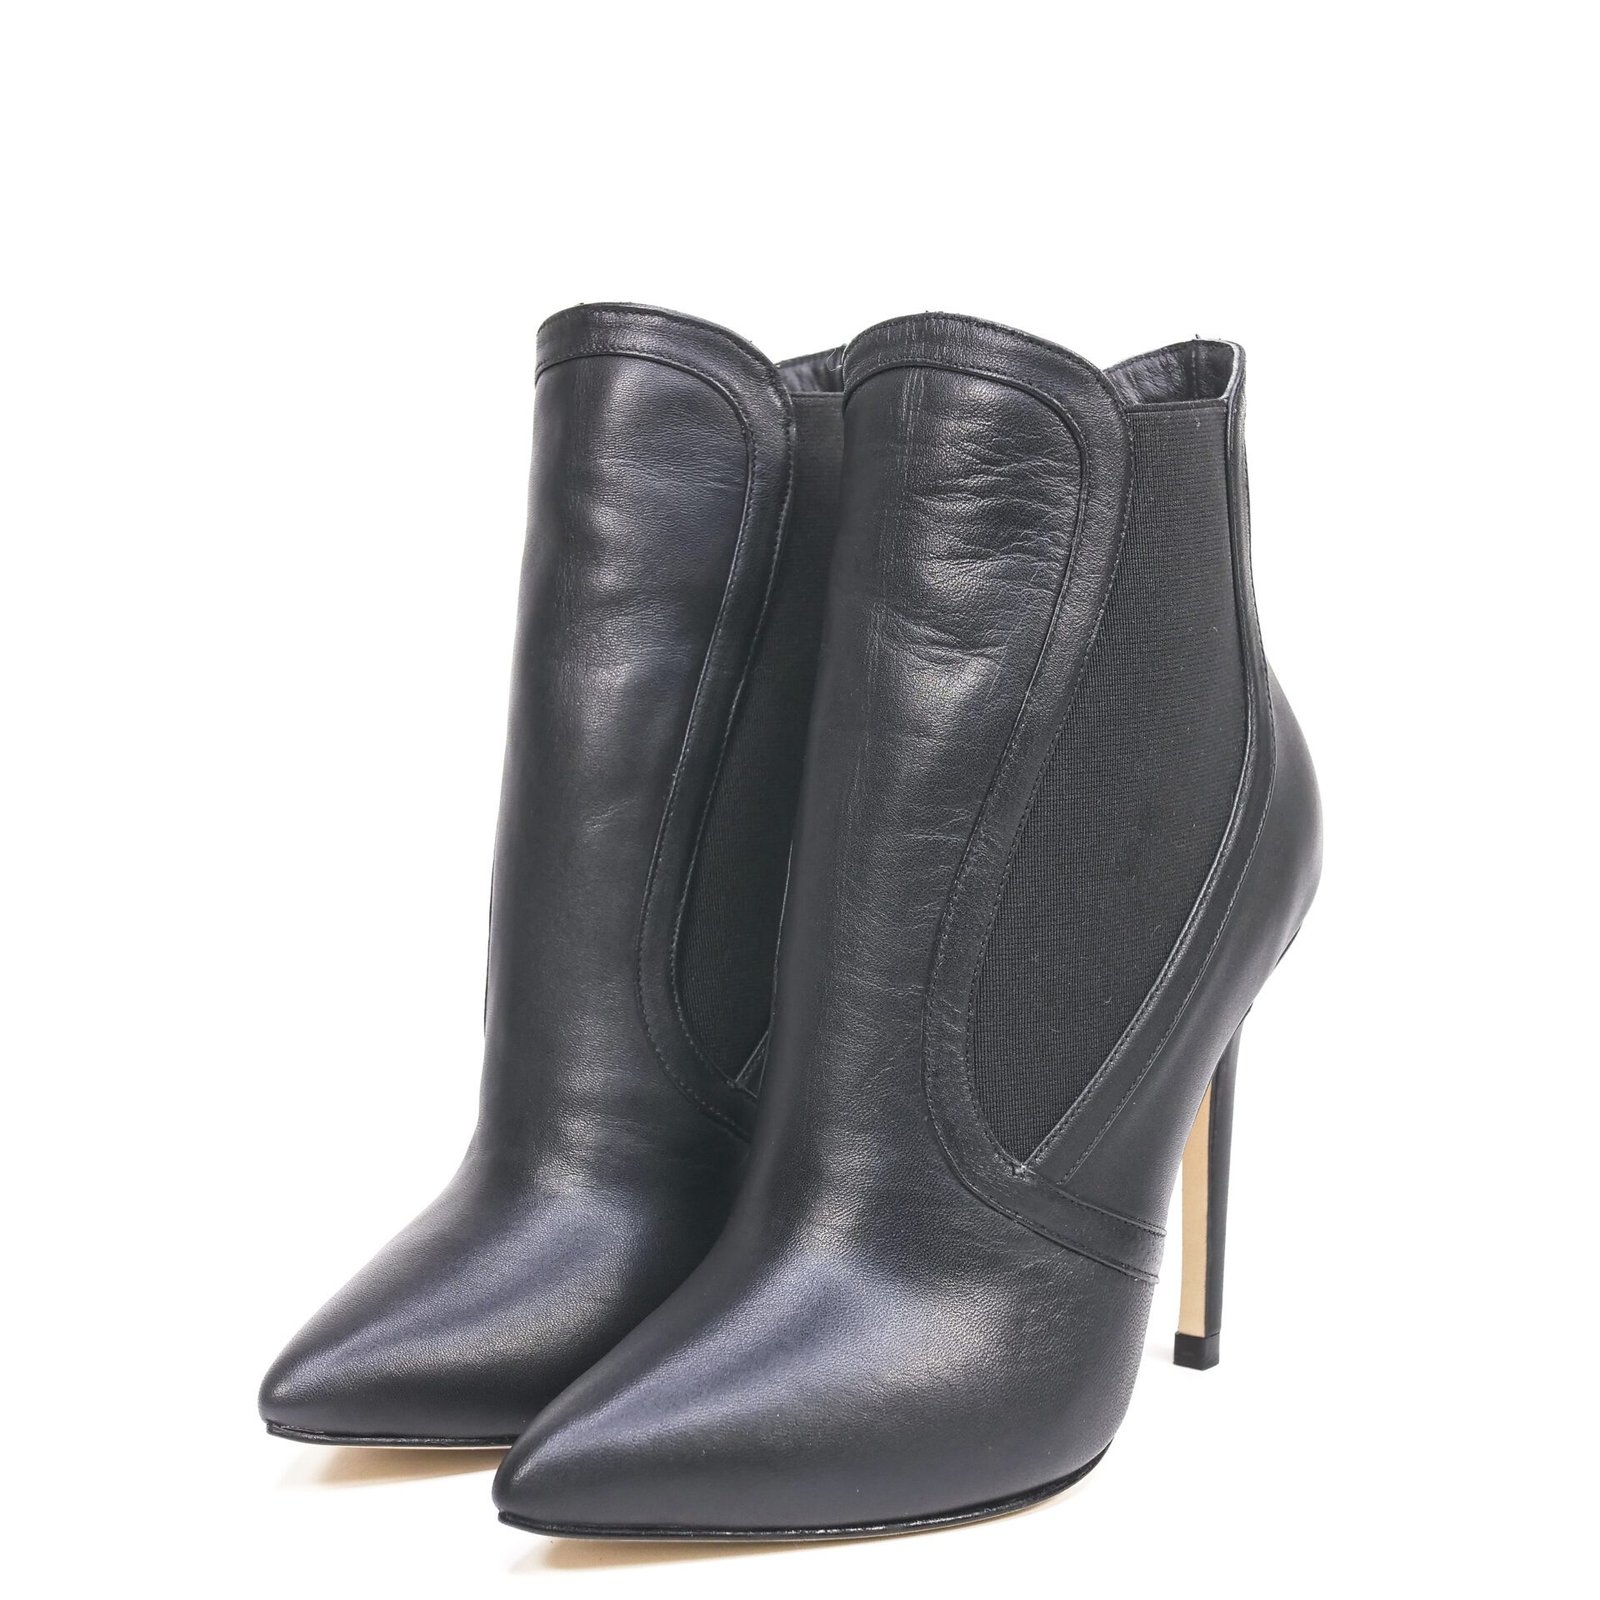 black pointed-toe boots